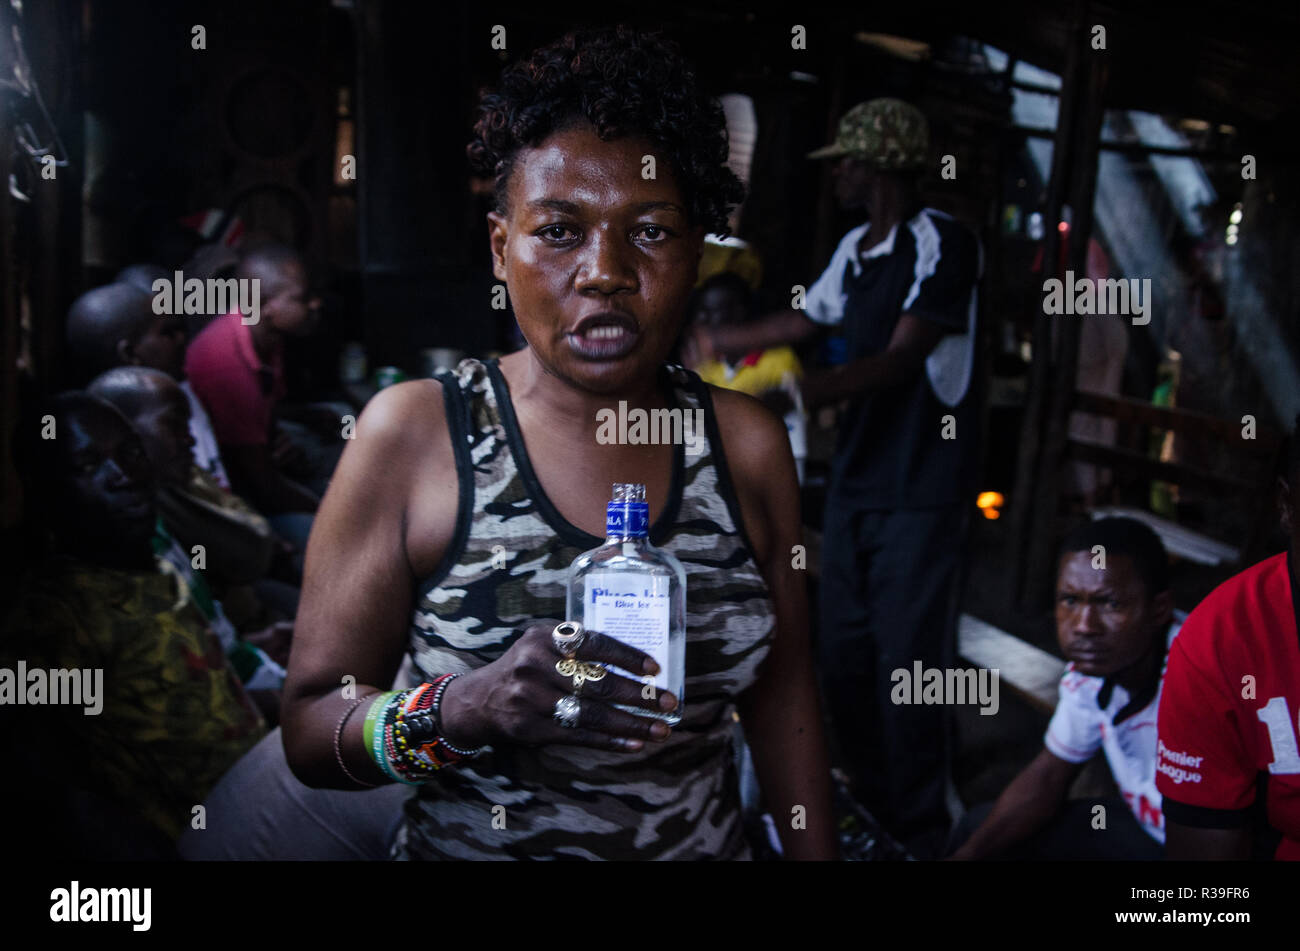 Kenya. 16th Nov, 2018. A woman seen taking alcohol at a local bar.For a long period of time, most women from Kibera slums have been under the influence of Alcohol. Not considering the side effects, women here consume it for different reasons including taking over stress and forgetting about their family problems back home. This is due to lack of enough job opportunities and support from their husbands.The high level of alcohol consumption has led to higher rate of deaths, blindness, and risk of many dangerous diseases such as cancer, hypertension, stroke and traumatic injuries with young Stock Photo